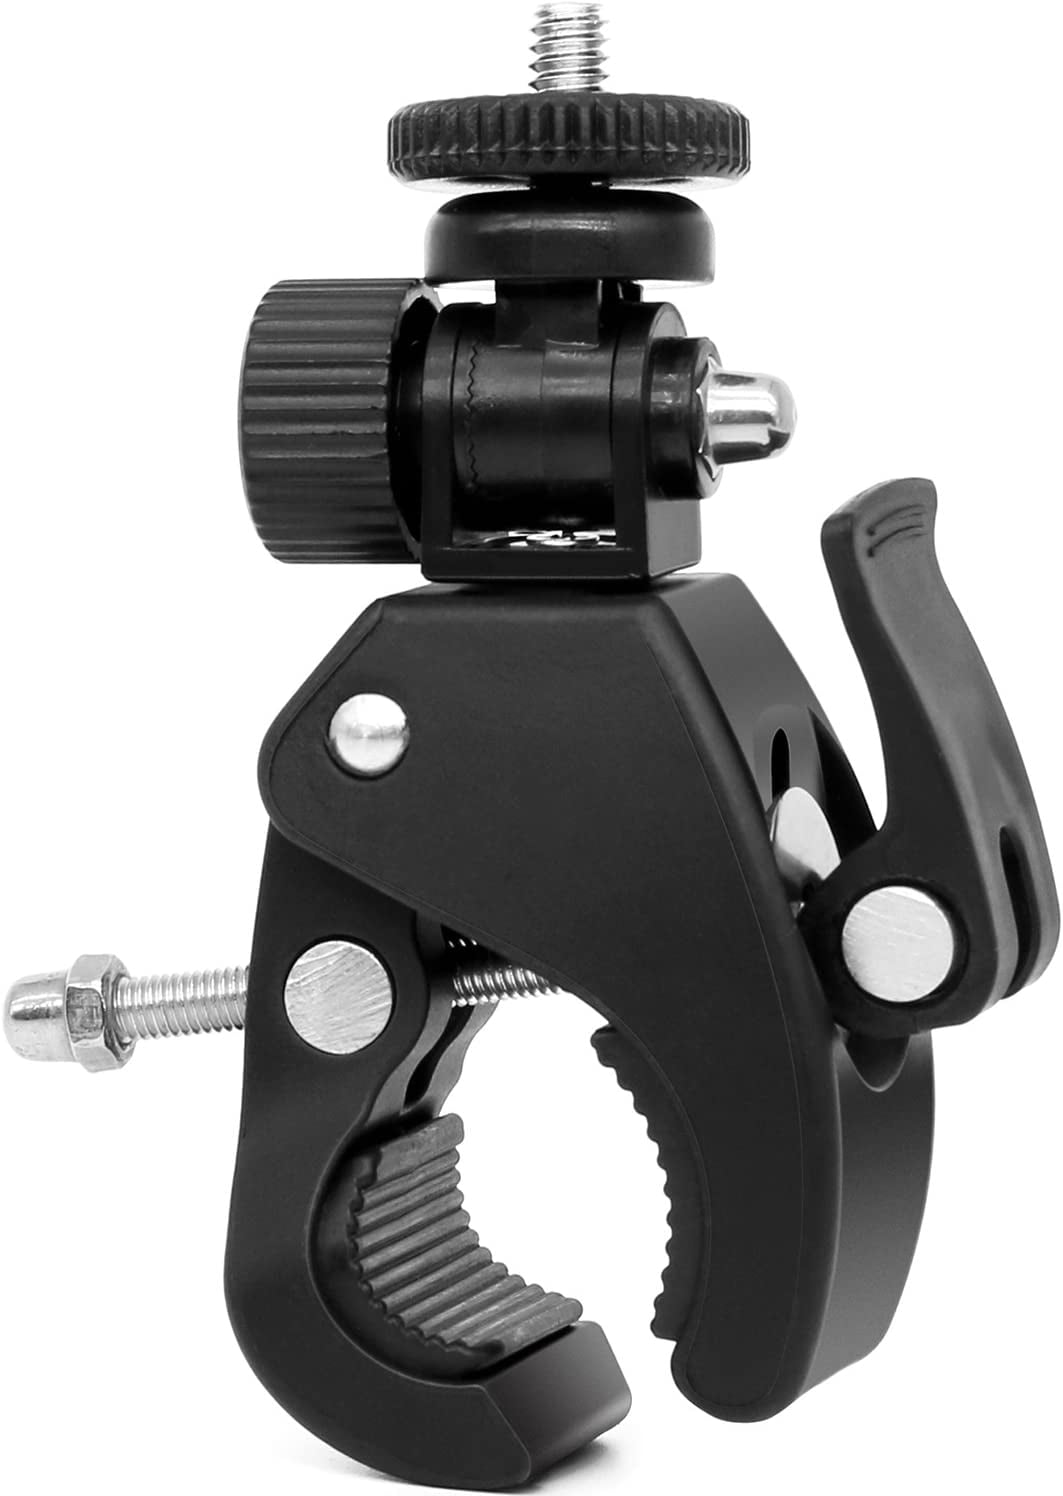 Camera Super Clamp with Threaded Head Compatible for LCD Monitor,DSLR Cameras